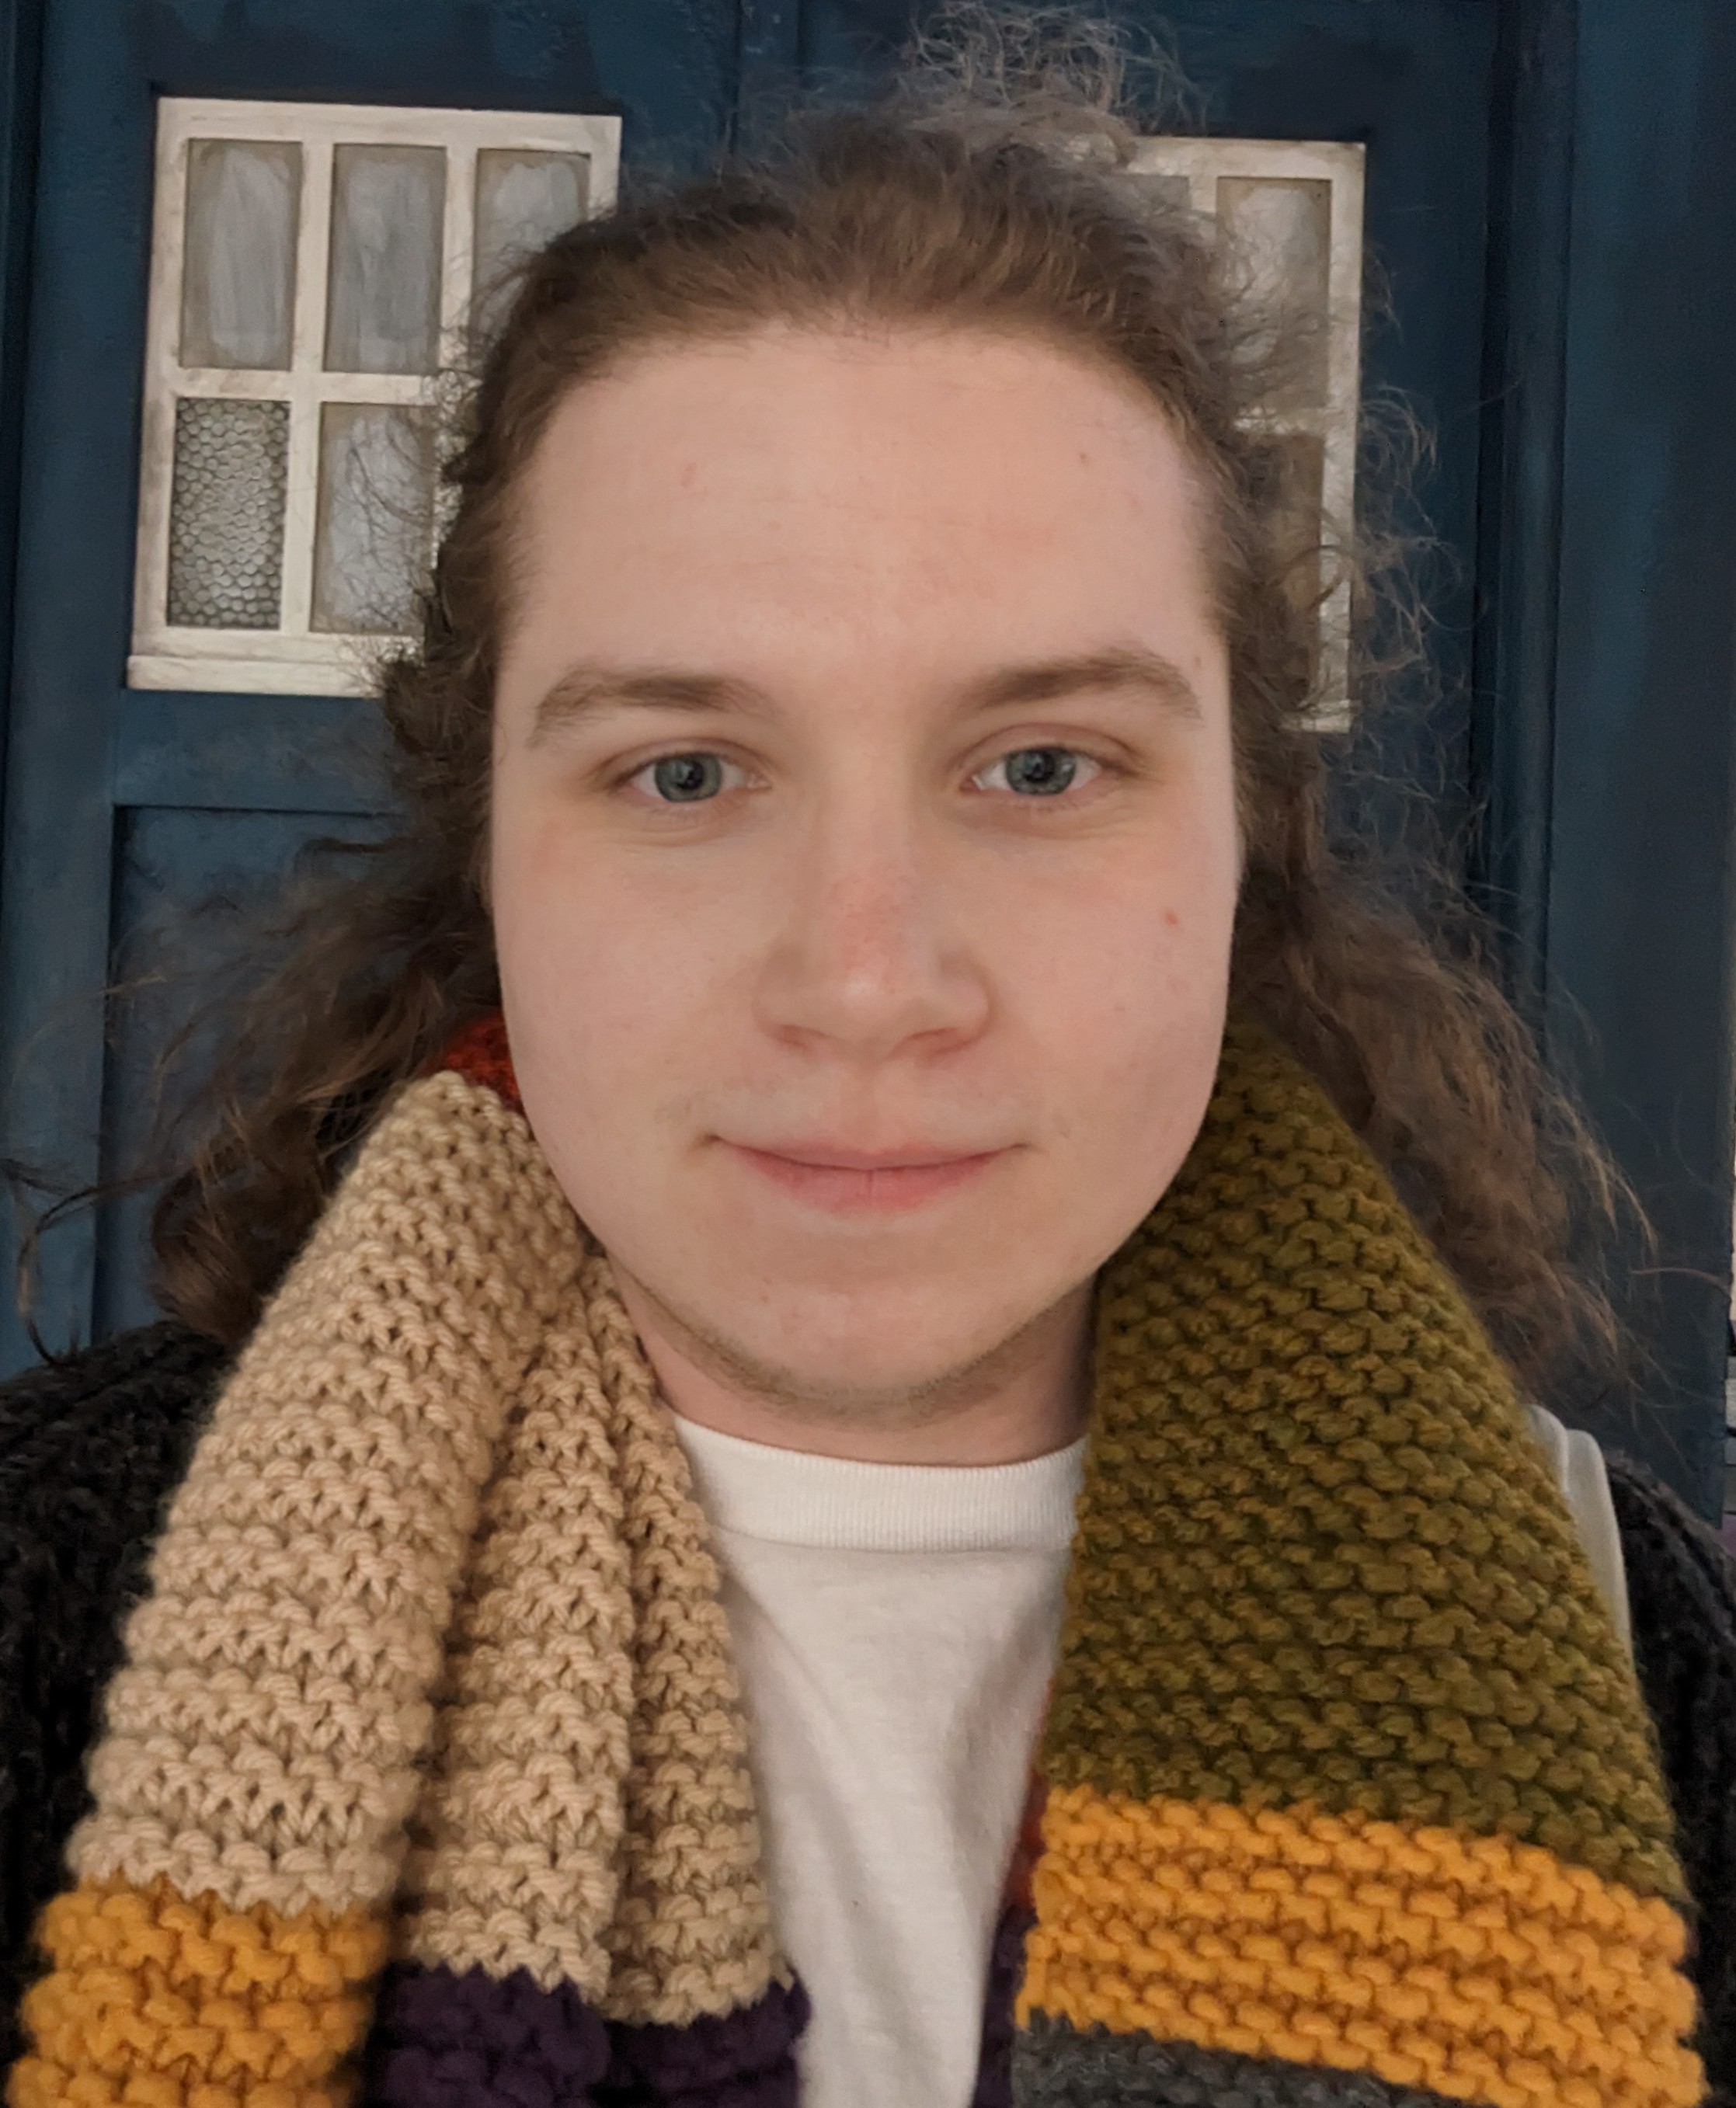 Photo of Elliot Vincent. They are framed from the shoulders up, smiling at the camera. They are wearing a colourful knitted scarf and the background is the doors of the TARDIS from Doctor Who.